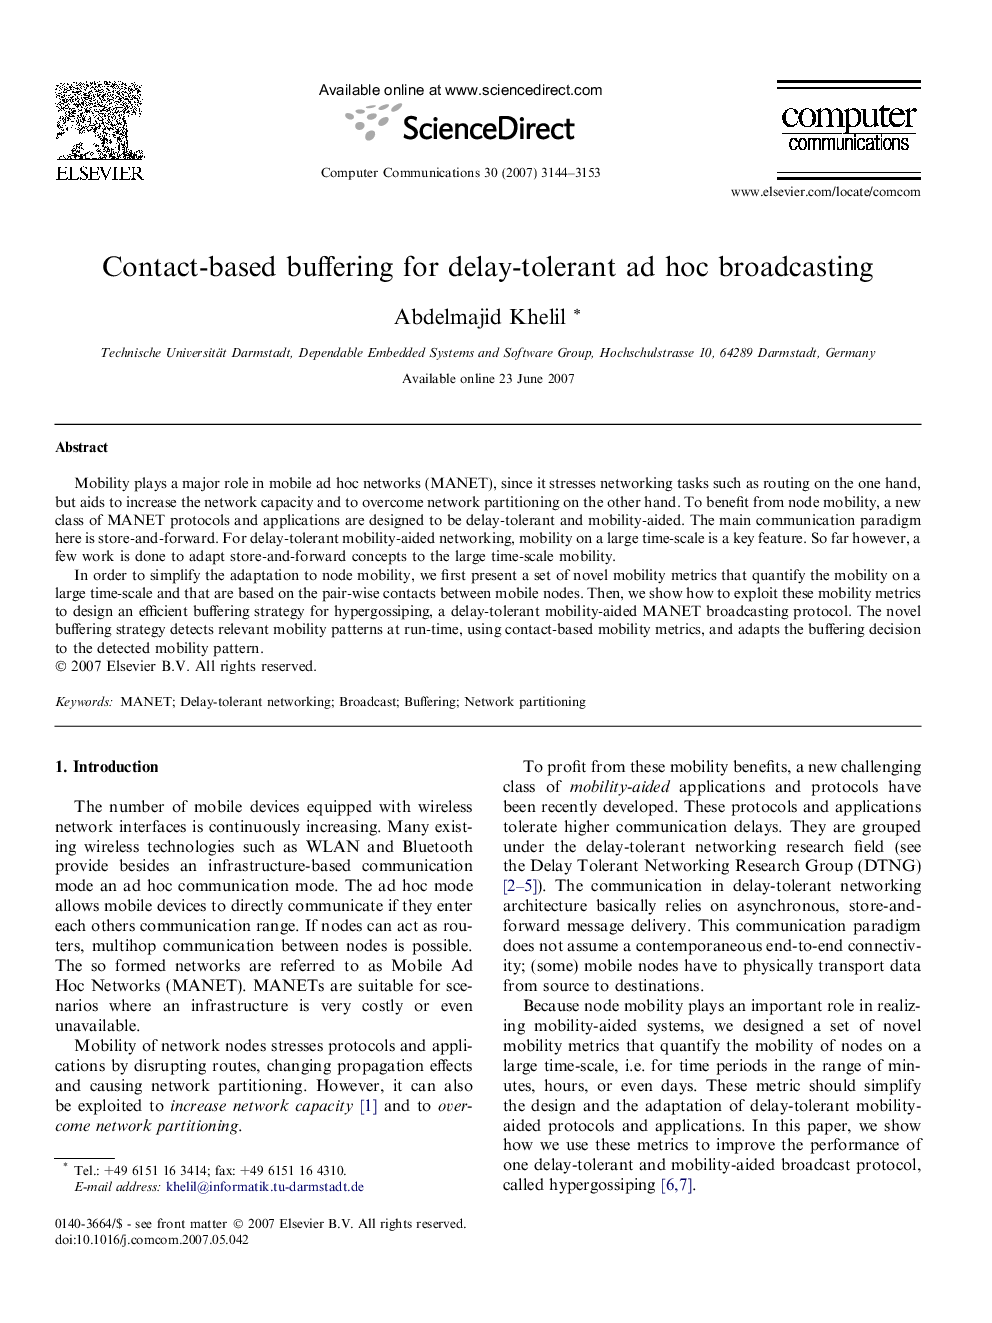 Contact-based buffering for delay-tolerant ad hoc broadcasting